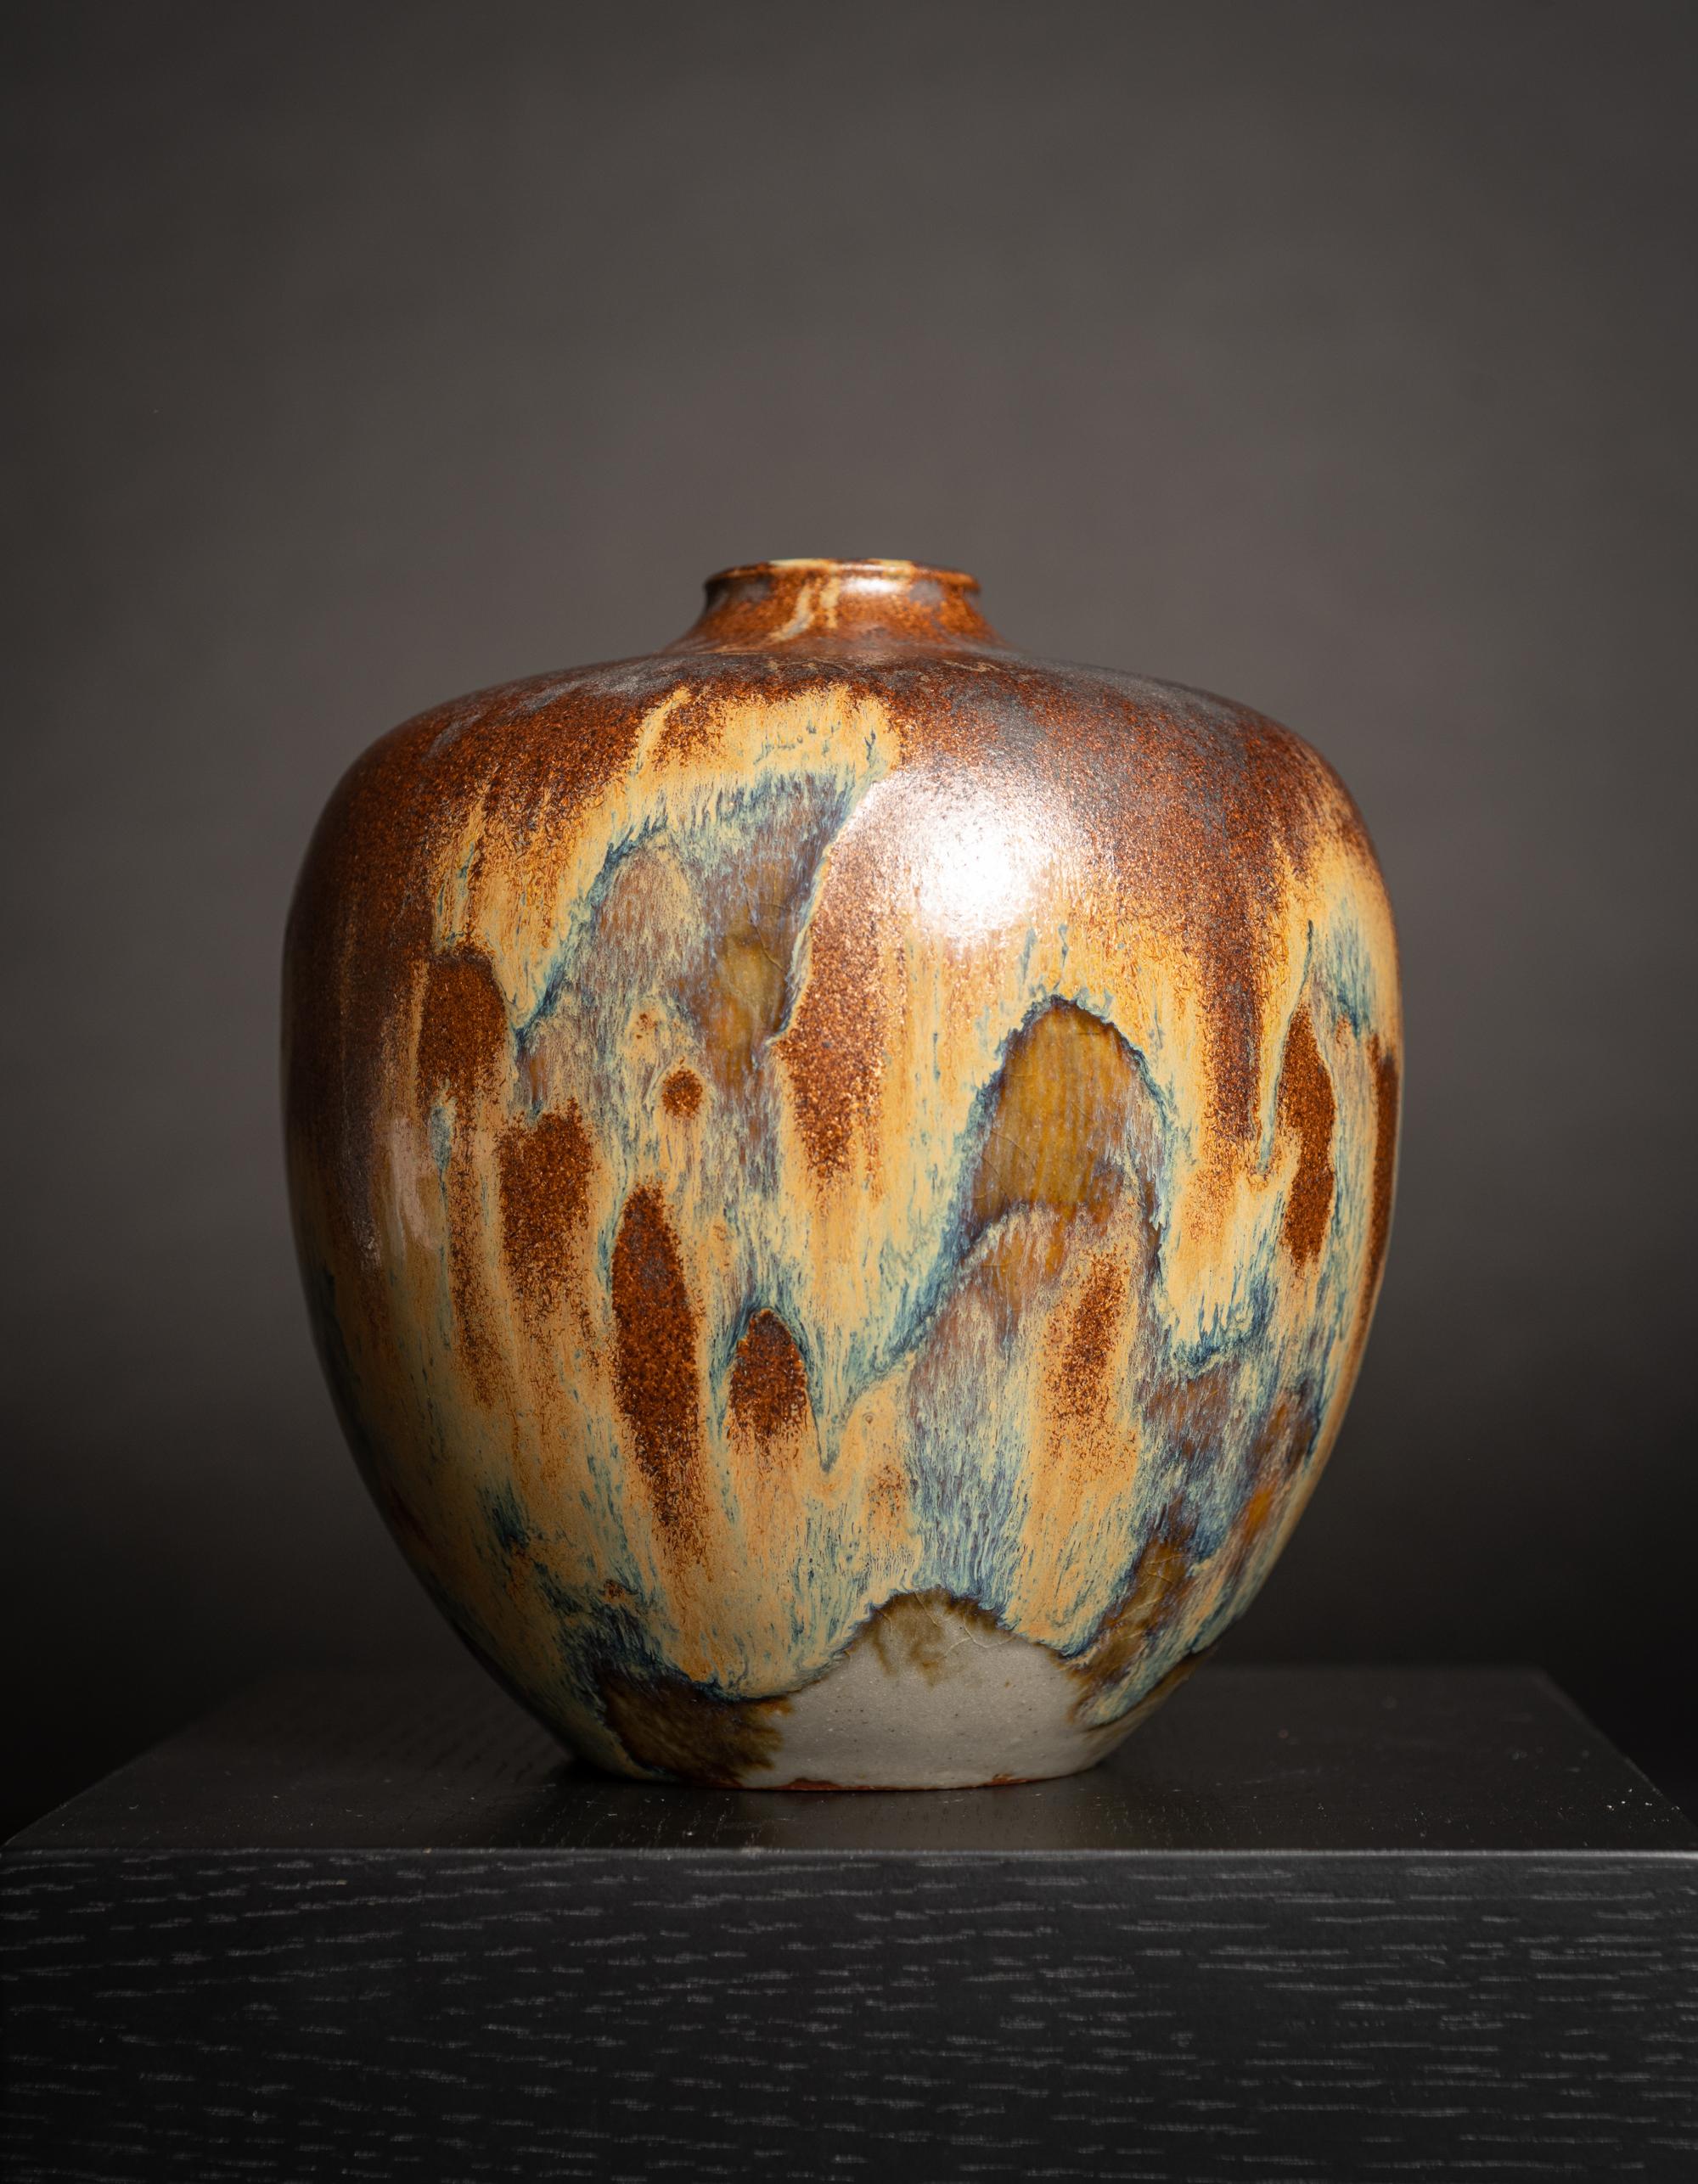 Model #6006. Auguste Delaherche turned the science of experimentation in ceramic ware into an art form. Coming from a long tradition of potters in the Beauvais region of France dating back to antiquity, Delaherche displayed a fascination and an